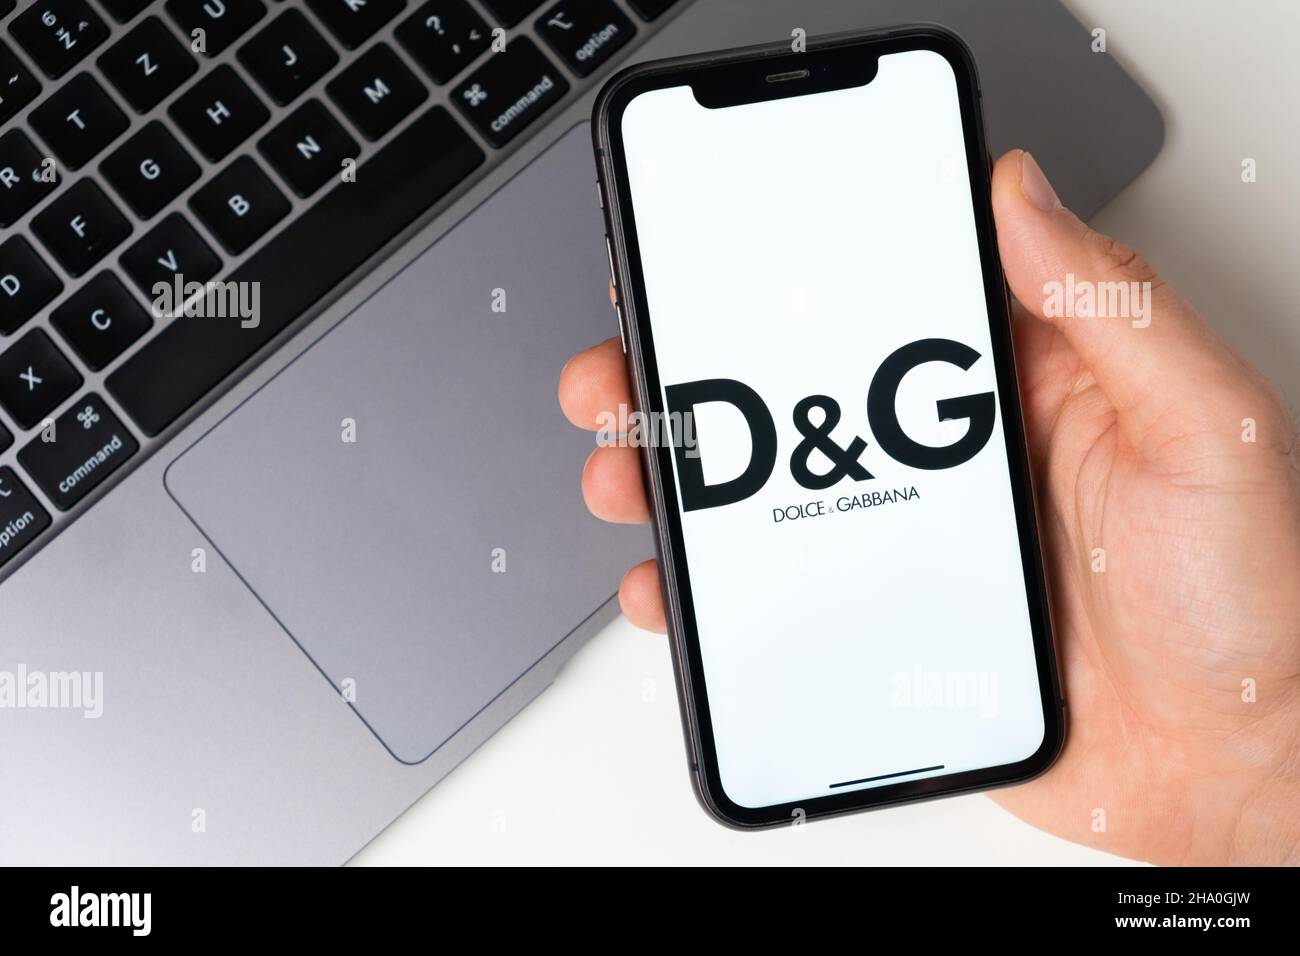 Dolce and Gabbana application for buying clothes, shoes and accessories online. Online shopping using a mobile phone or laptop November 2021, San Francisco, USA Stock Photo